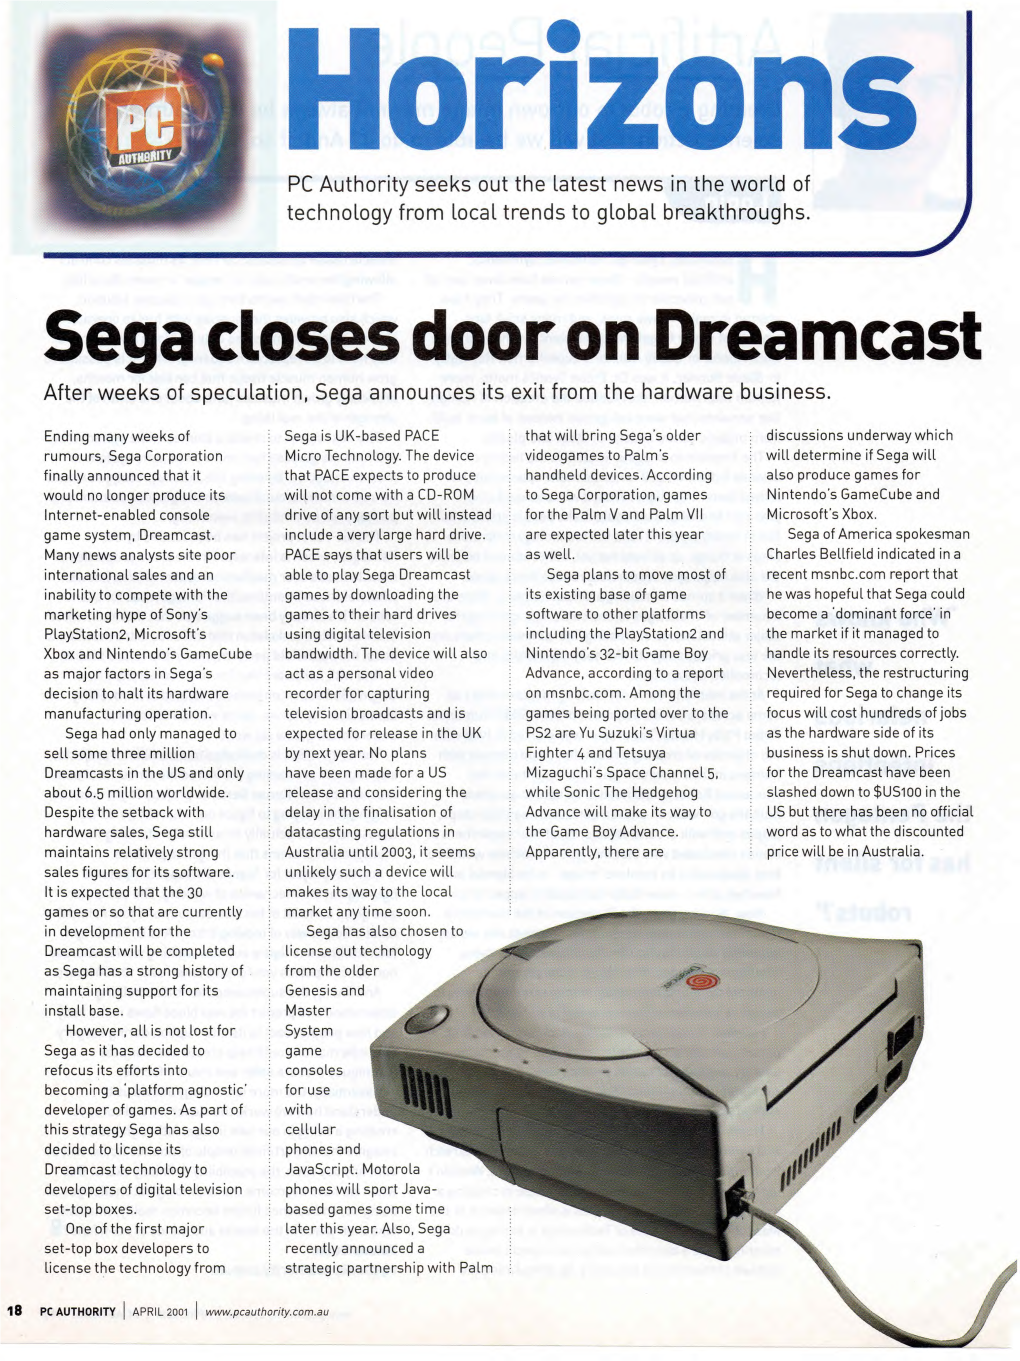 Sega Closes Door on Dreamcast After Weeks of Speculation, Sega Announces Its Exit from the Hardware Business